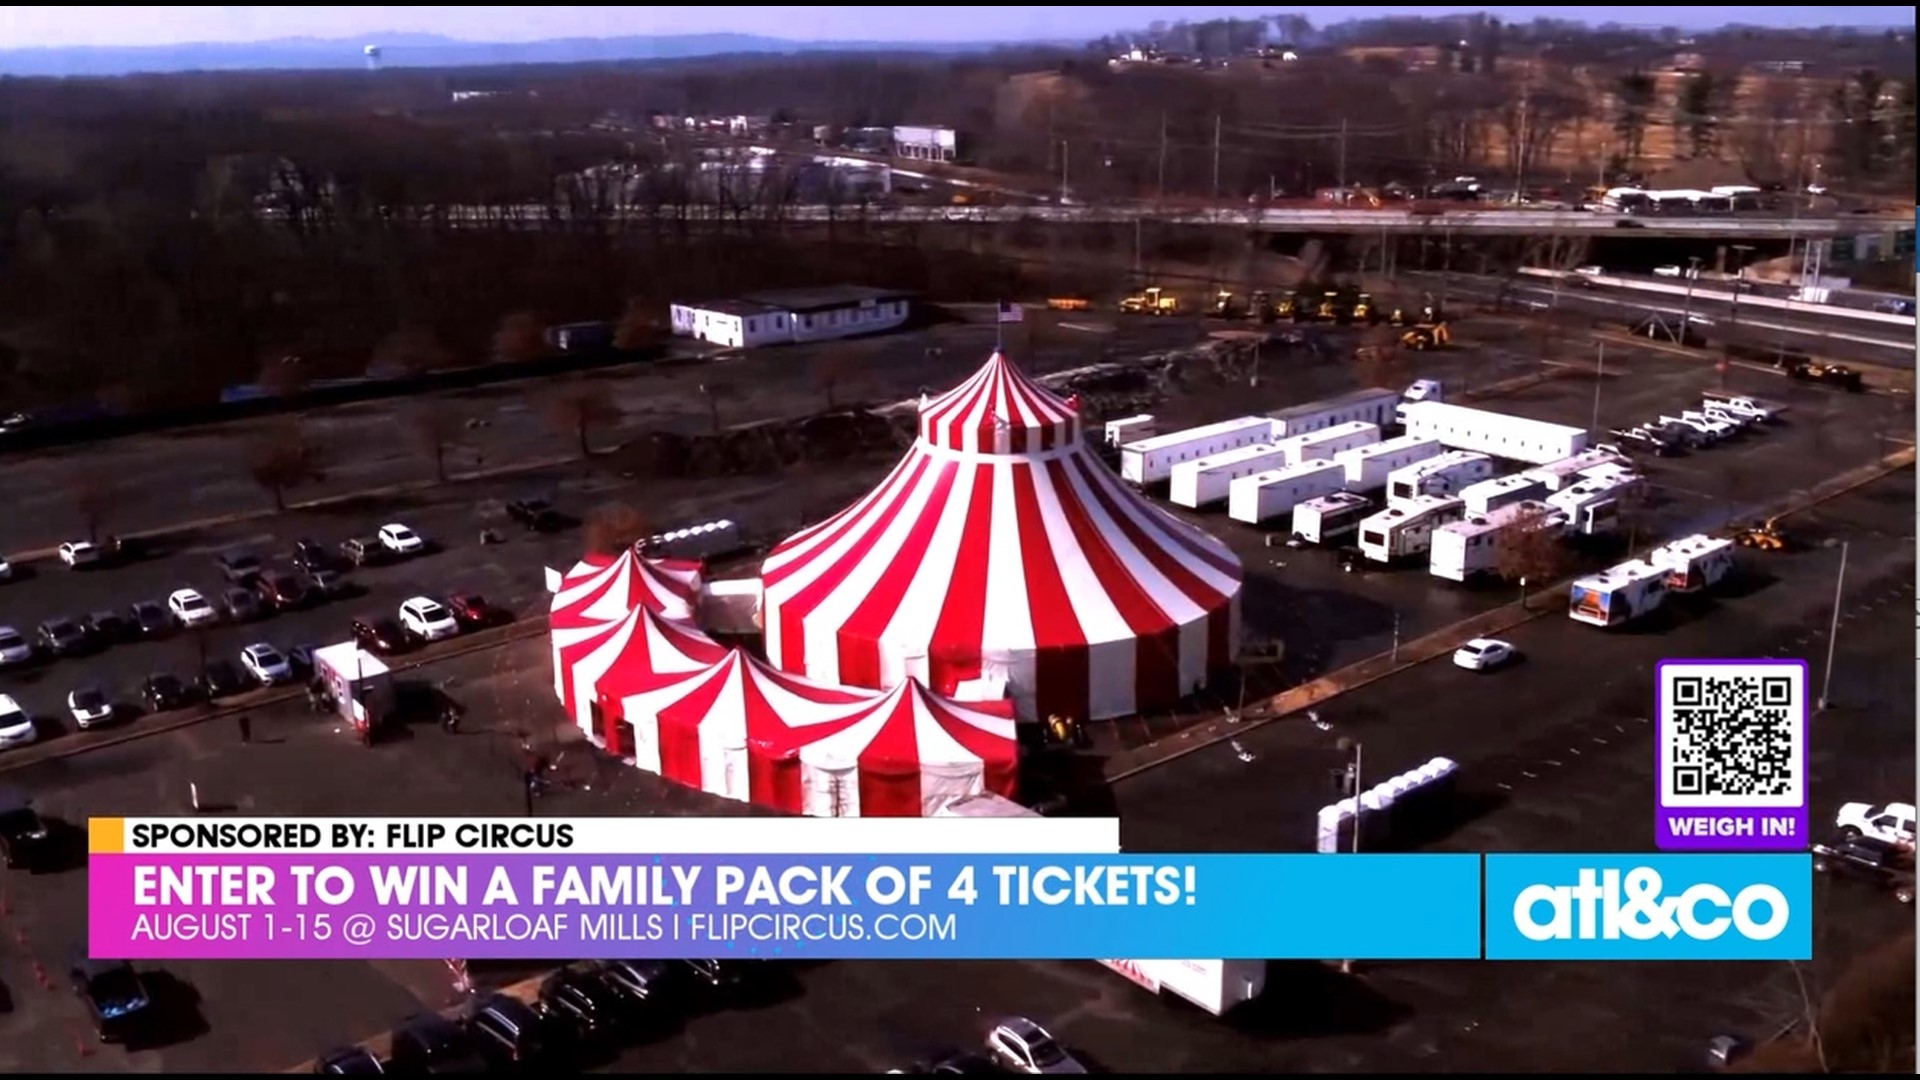 Enter to win a family four-pack of tickets to Flip Circus at Sugarloaf Mills. Visit AtlantaAndCompany.com to enter.